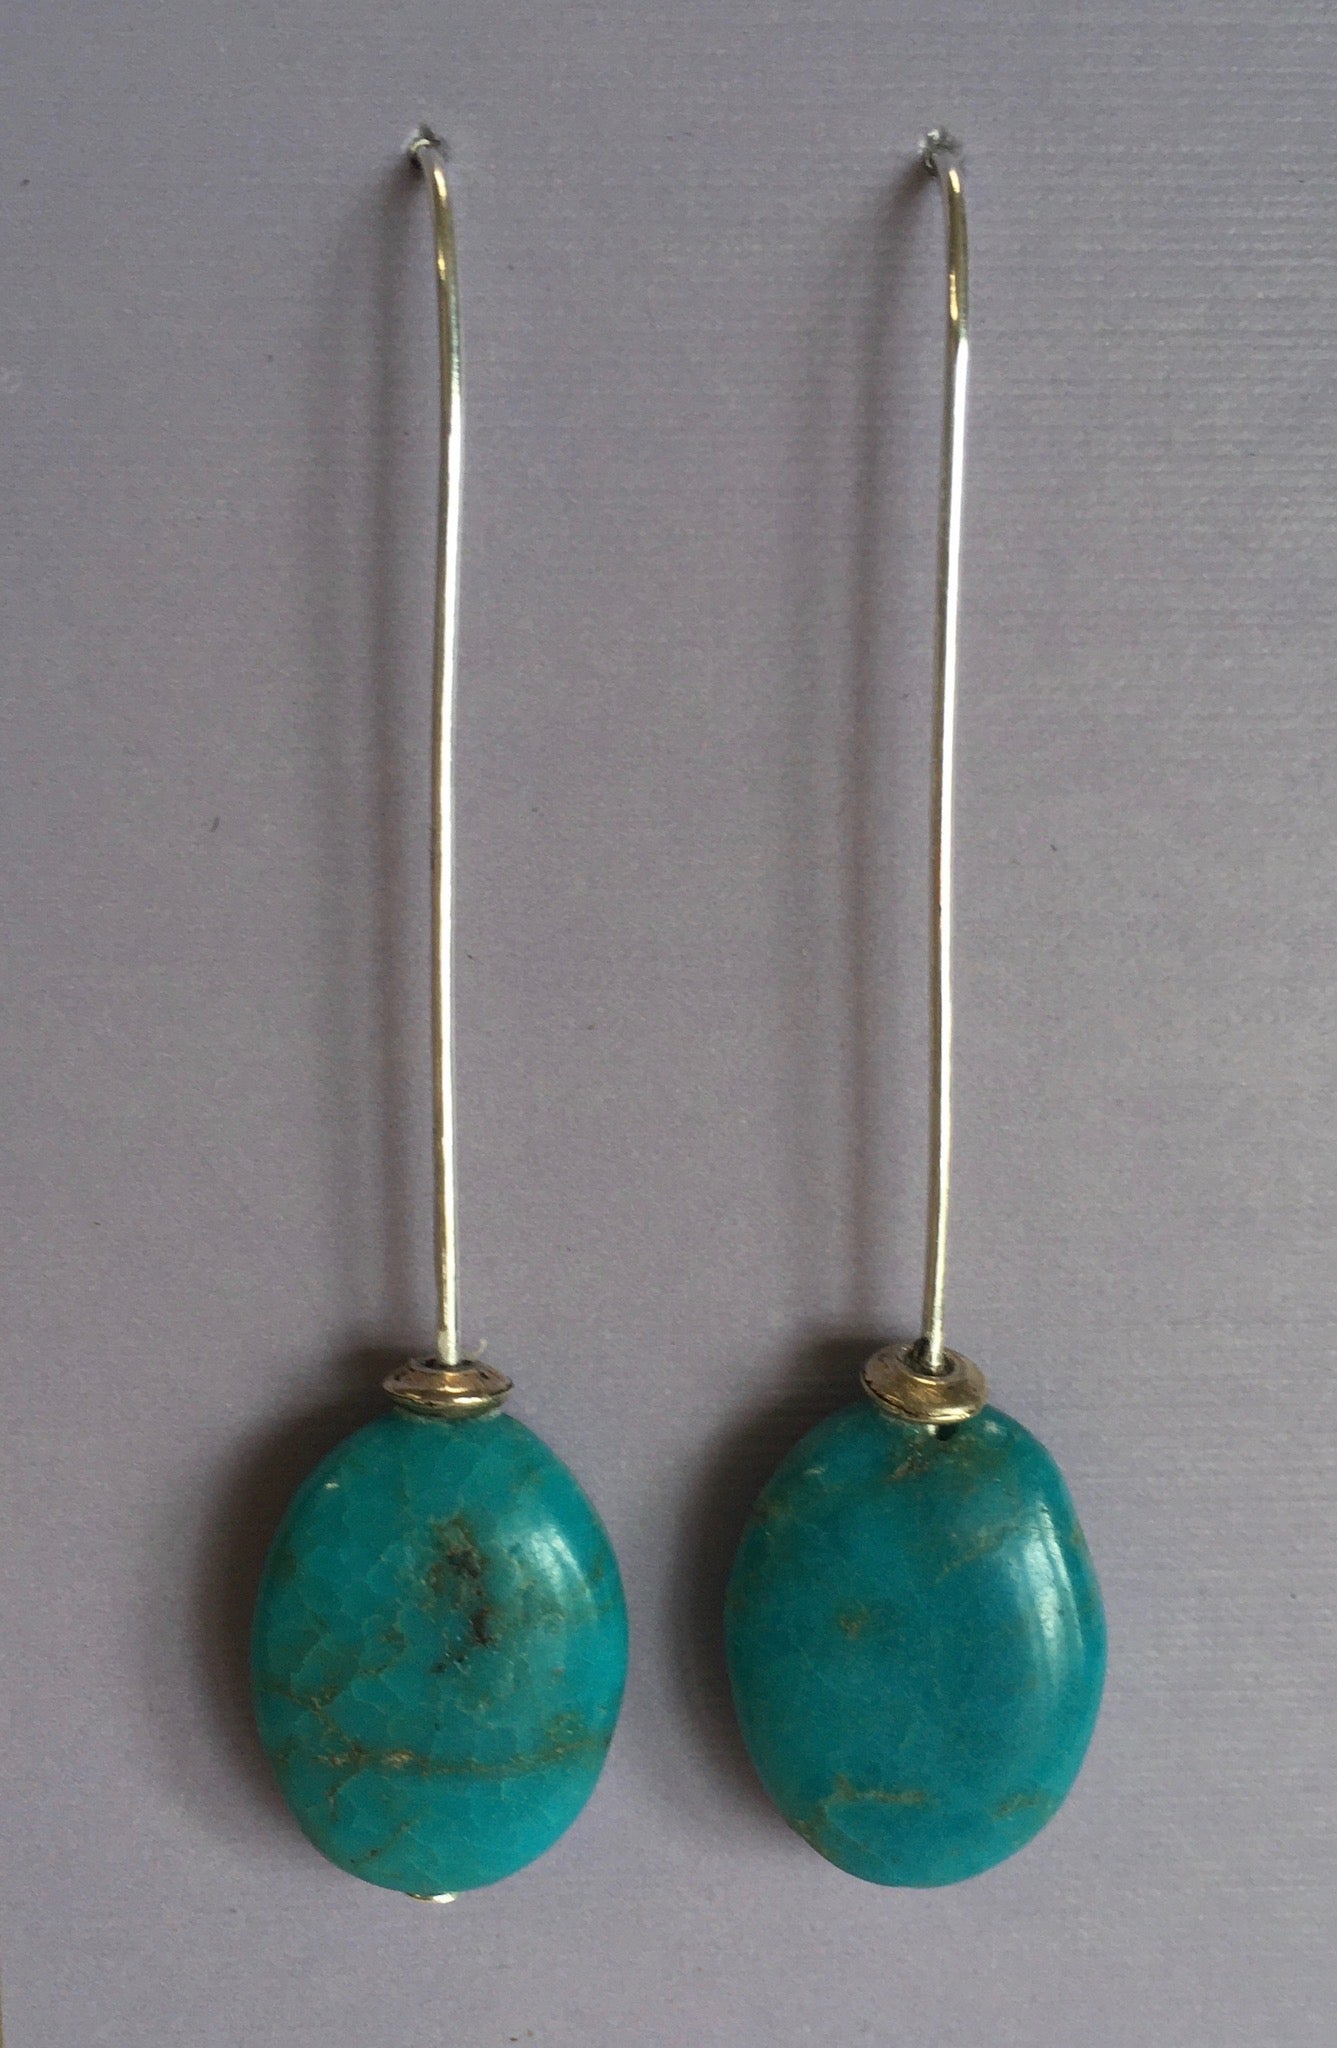 Oval Turquoise Long Drop Earrings Artist: Terry Kreuzer  5/8" X 1/2" oval turquoise  2" long including ear wires  Stirling Silver ear wires  Please note, the jewelry is custom designed by the Artist , with a slight variation between each piece